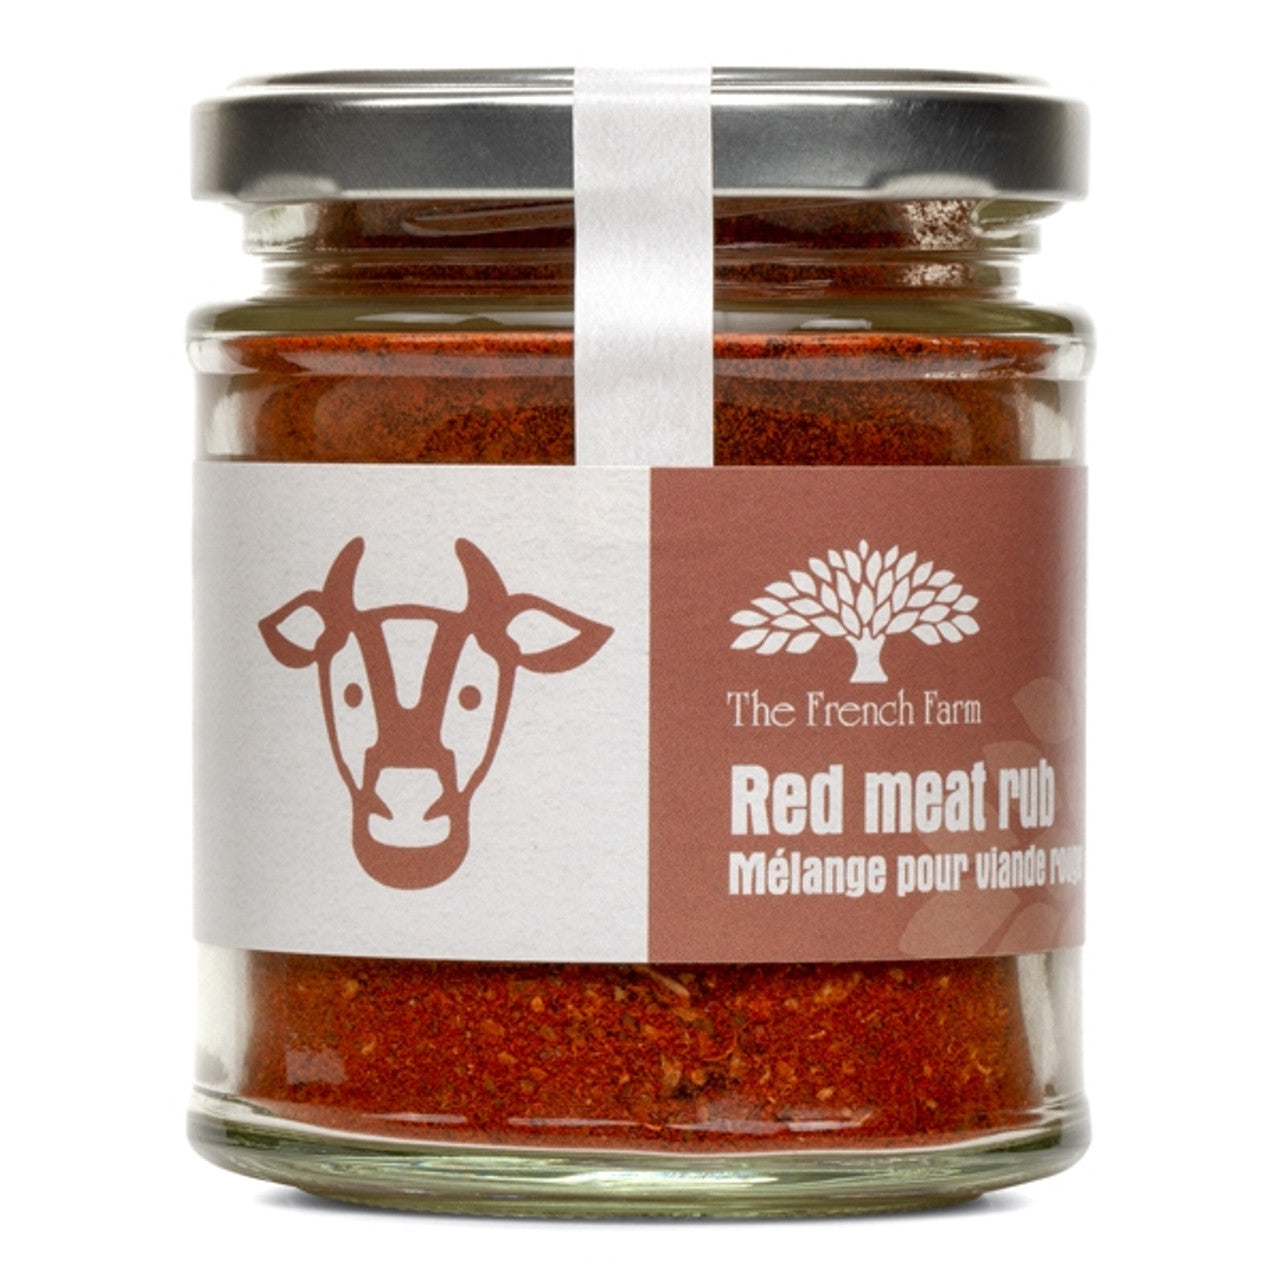 Red Meat Rub